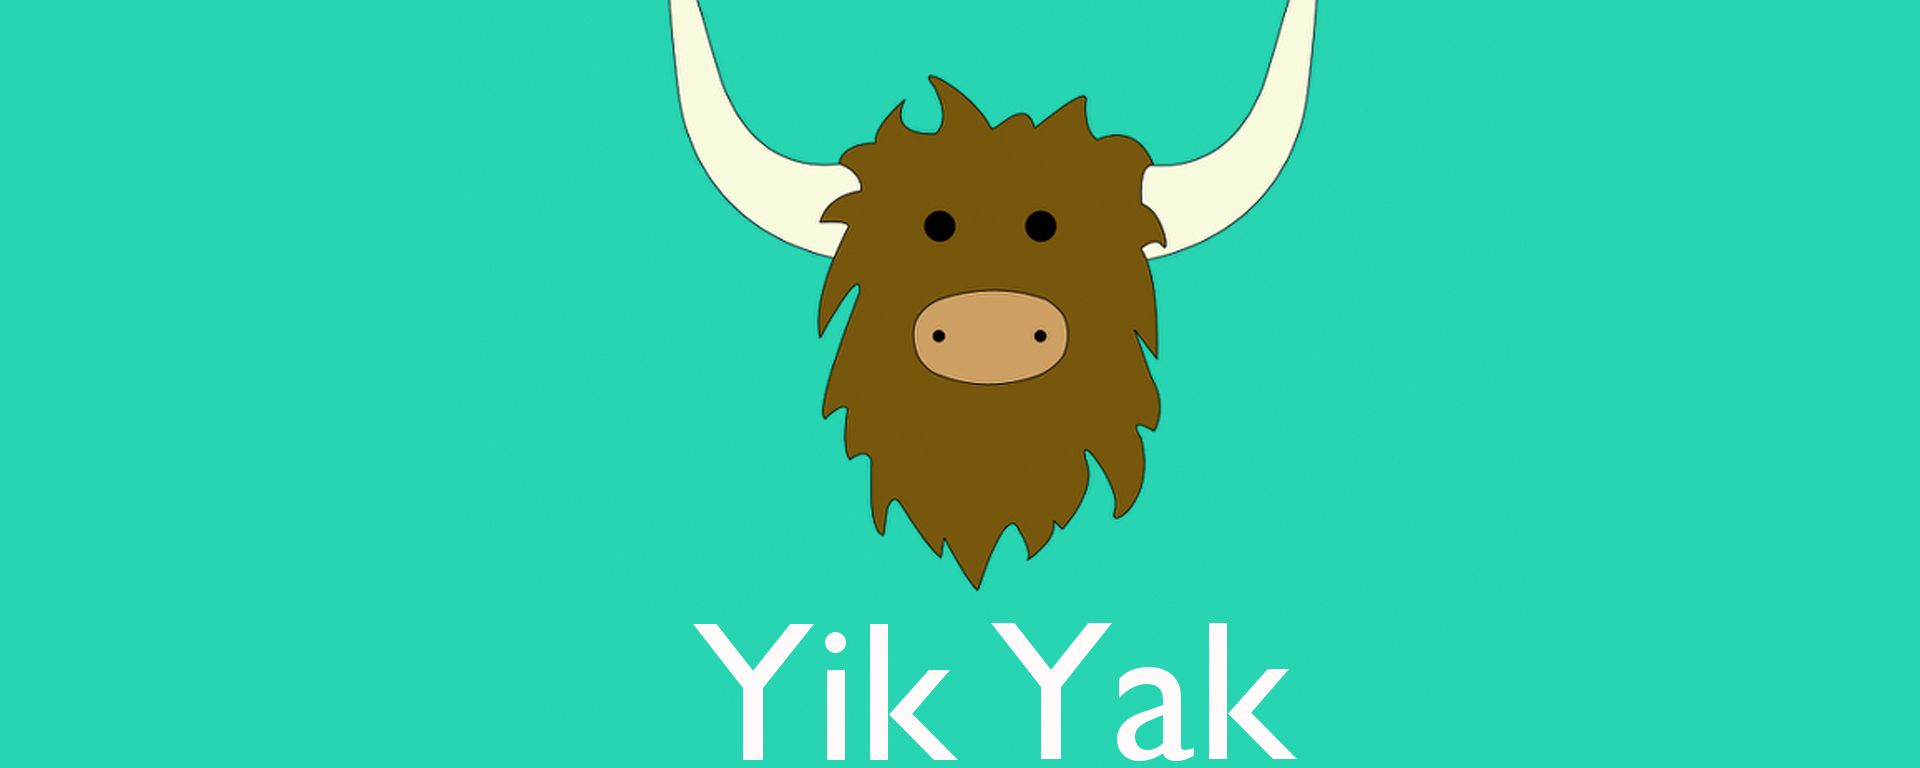 1920x768 A Little Yik, A Little Yak, Some Say a lot of Ick. 